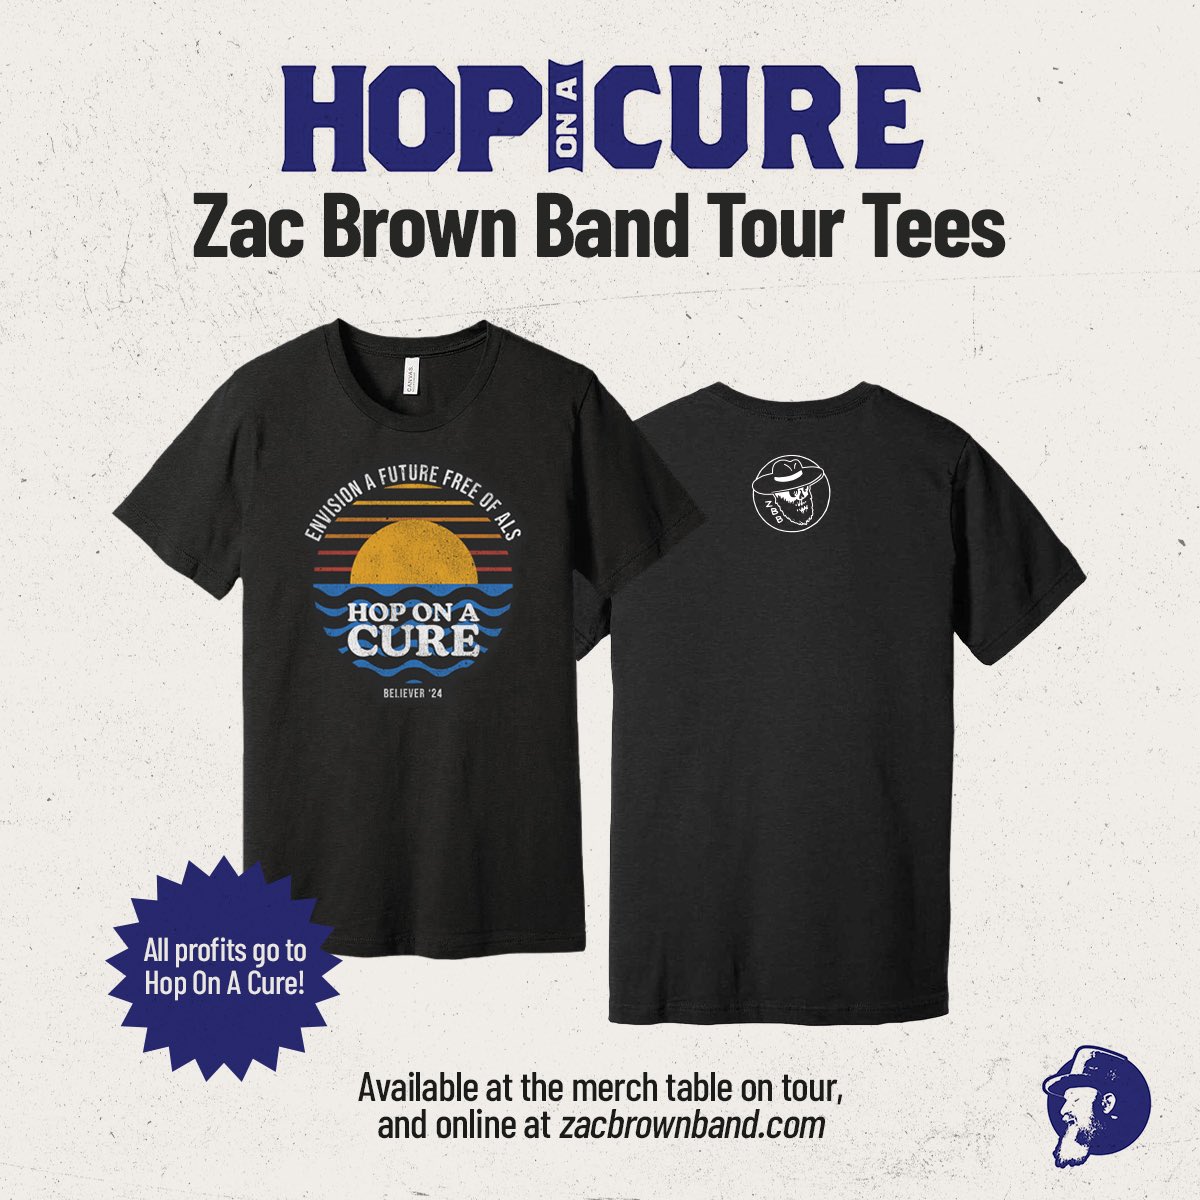 #Charlotte! Get your Hop On A Cure tee at TONIGHT'S @zacbrownband show: 
💙 section 109 merch stand
💙 section 134 merch stand

#zbb #zamily #believeinacure💙